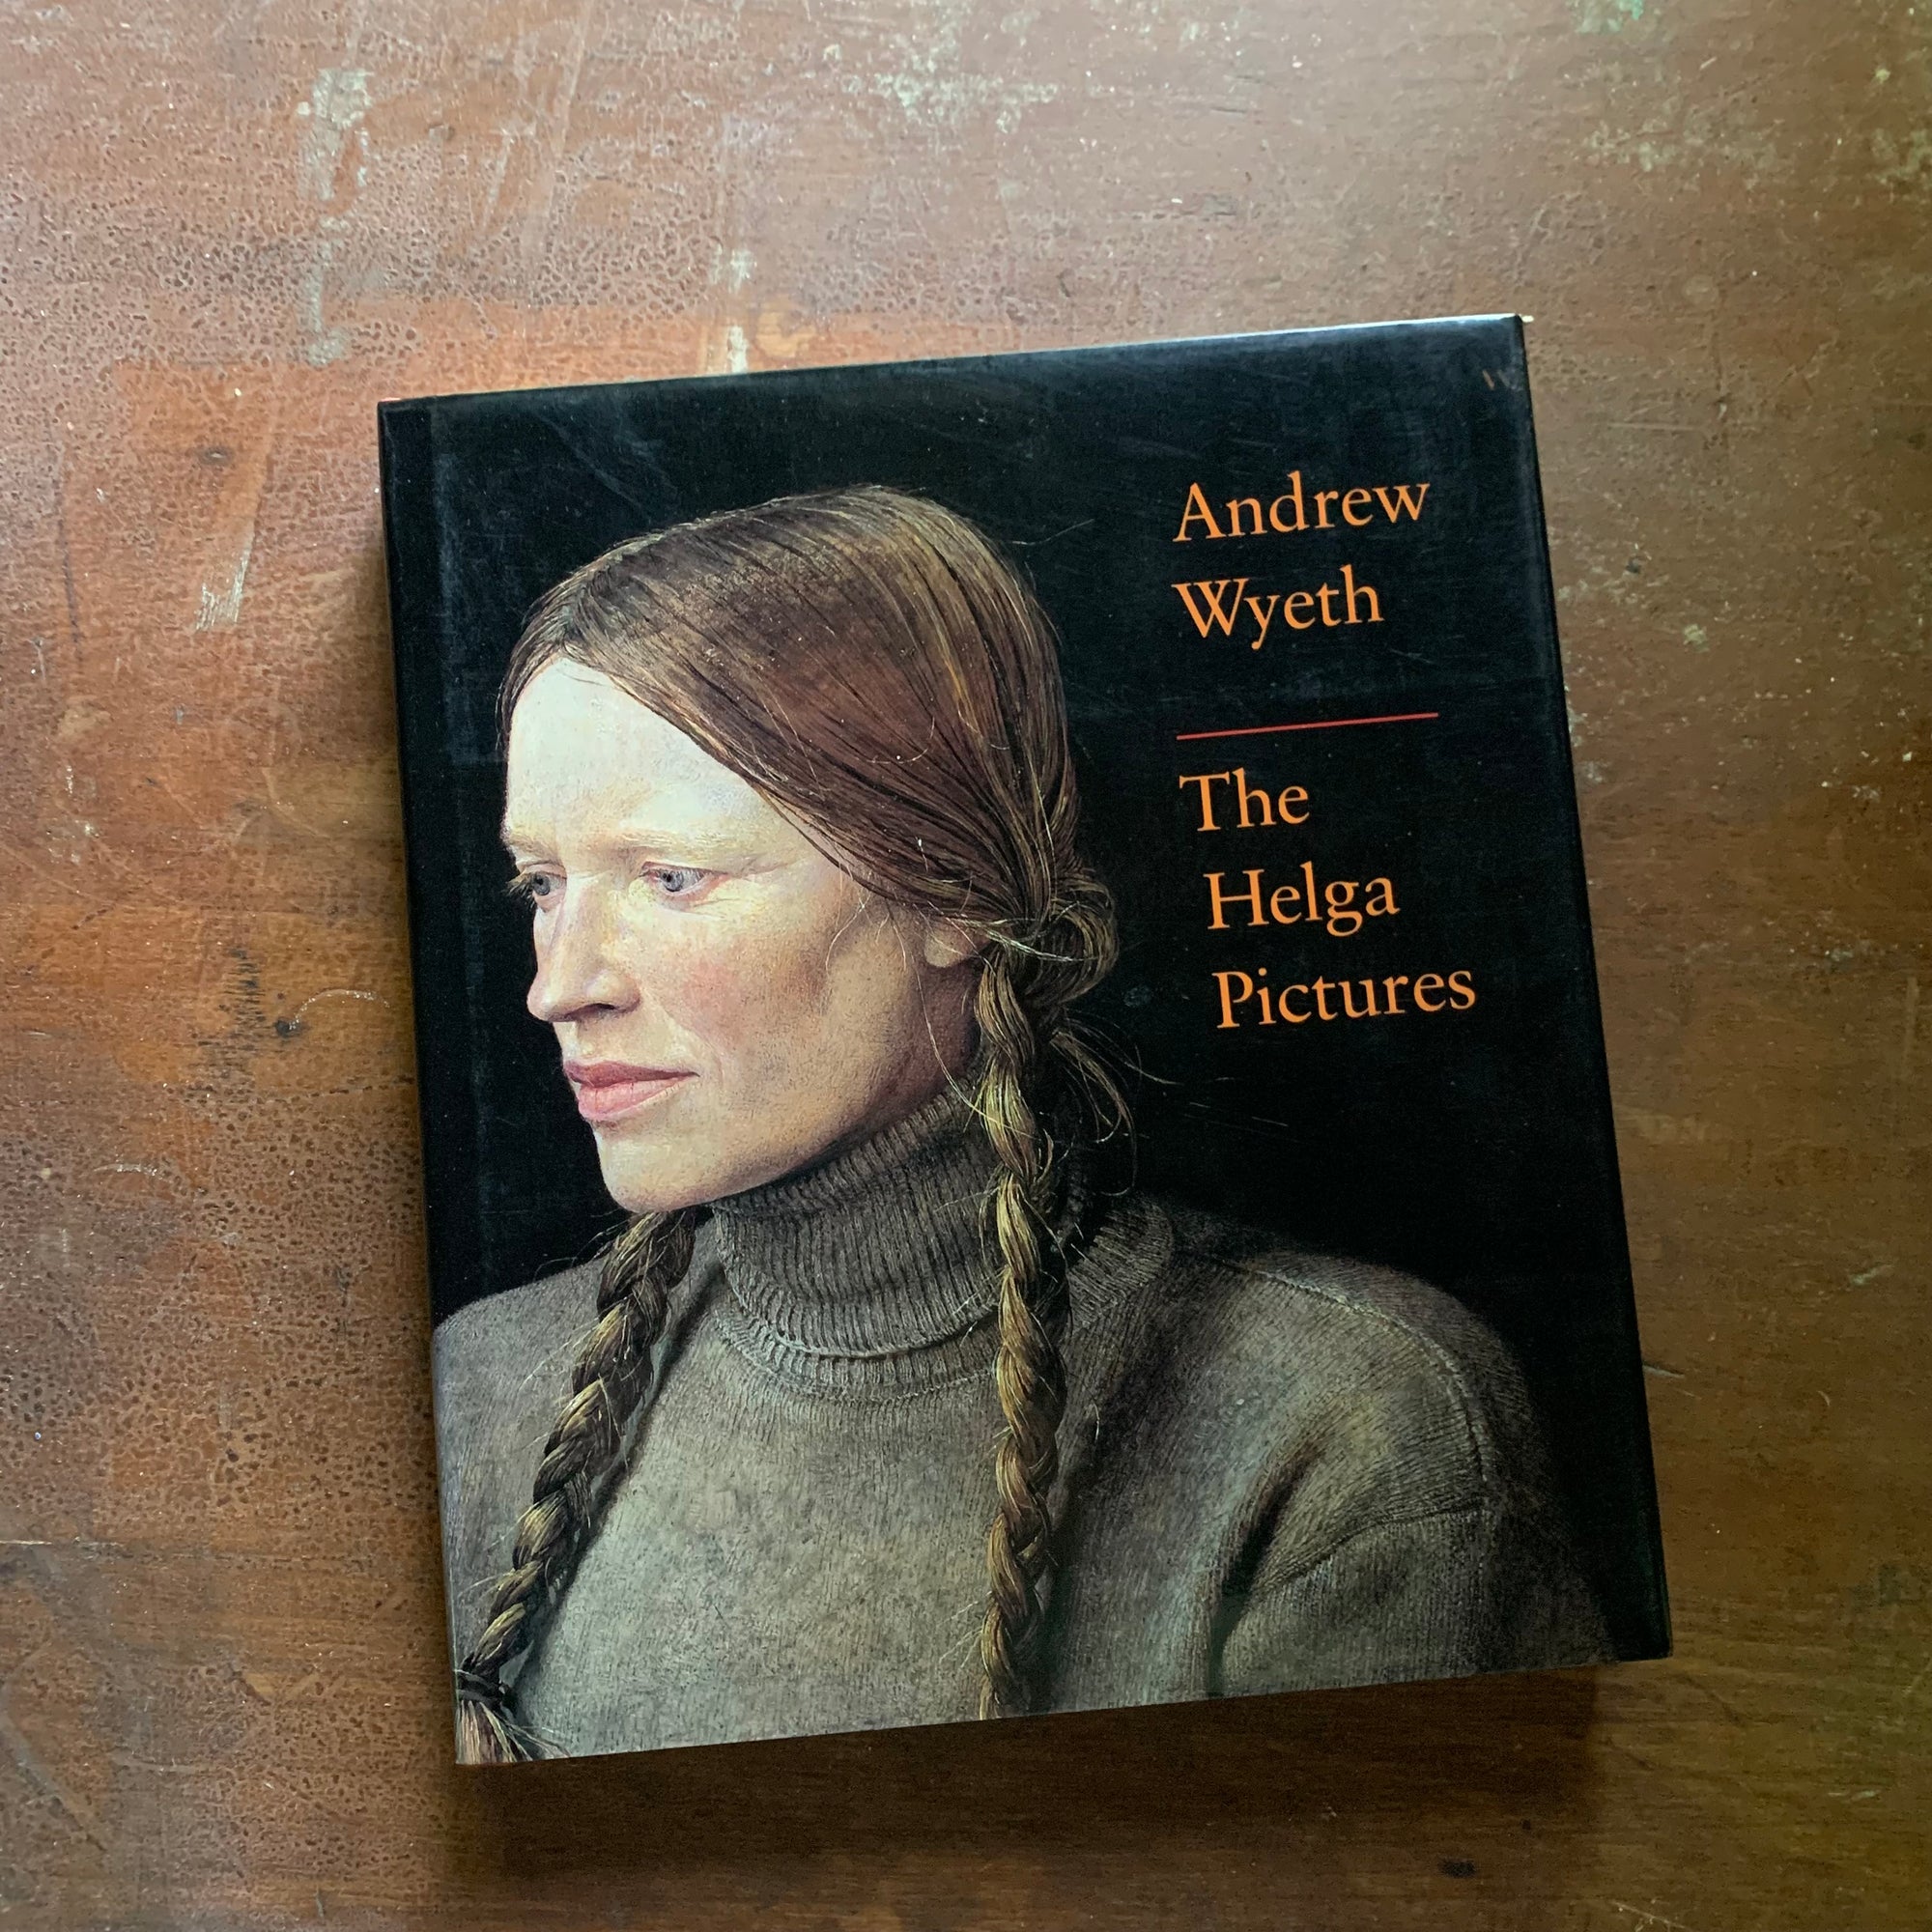 Andrew Wyeth The Helga Pictures - Hard Cover with Dust Jacket